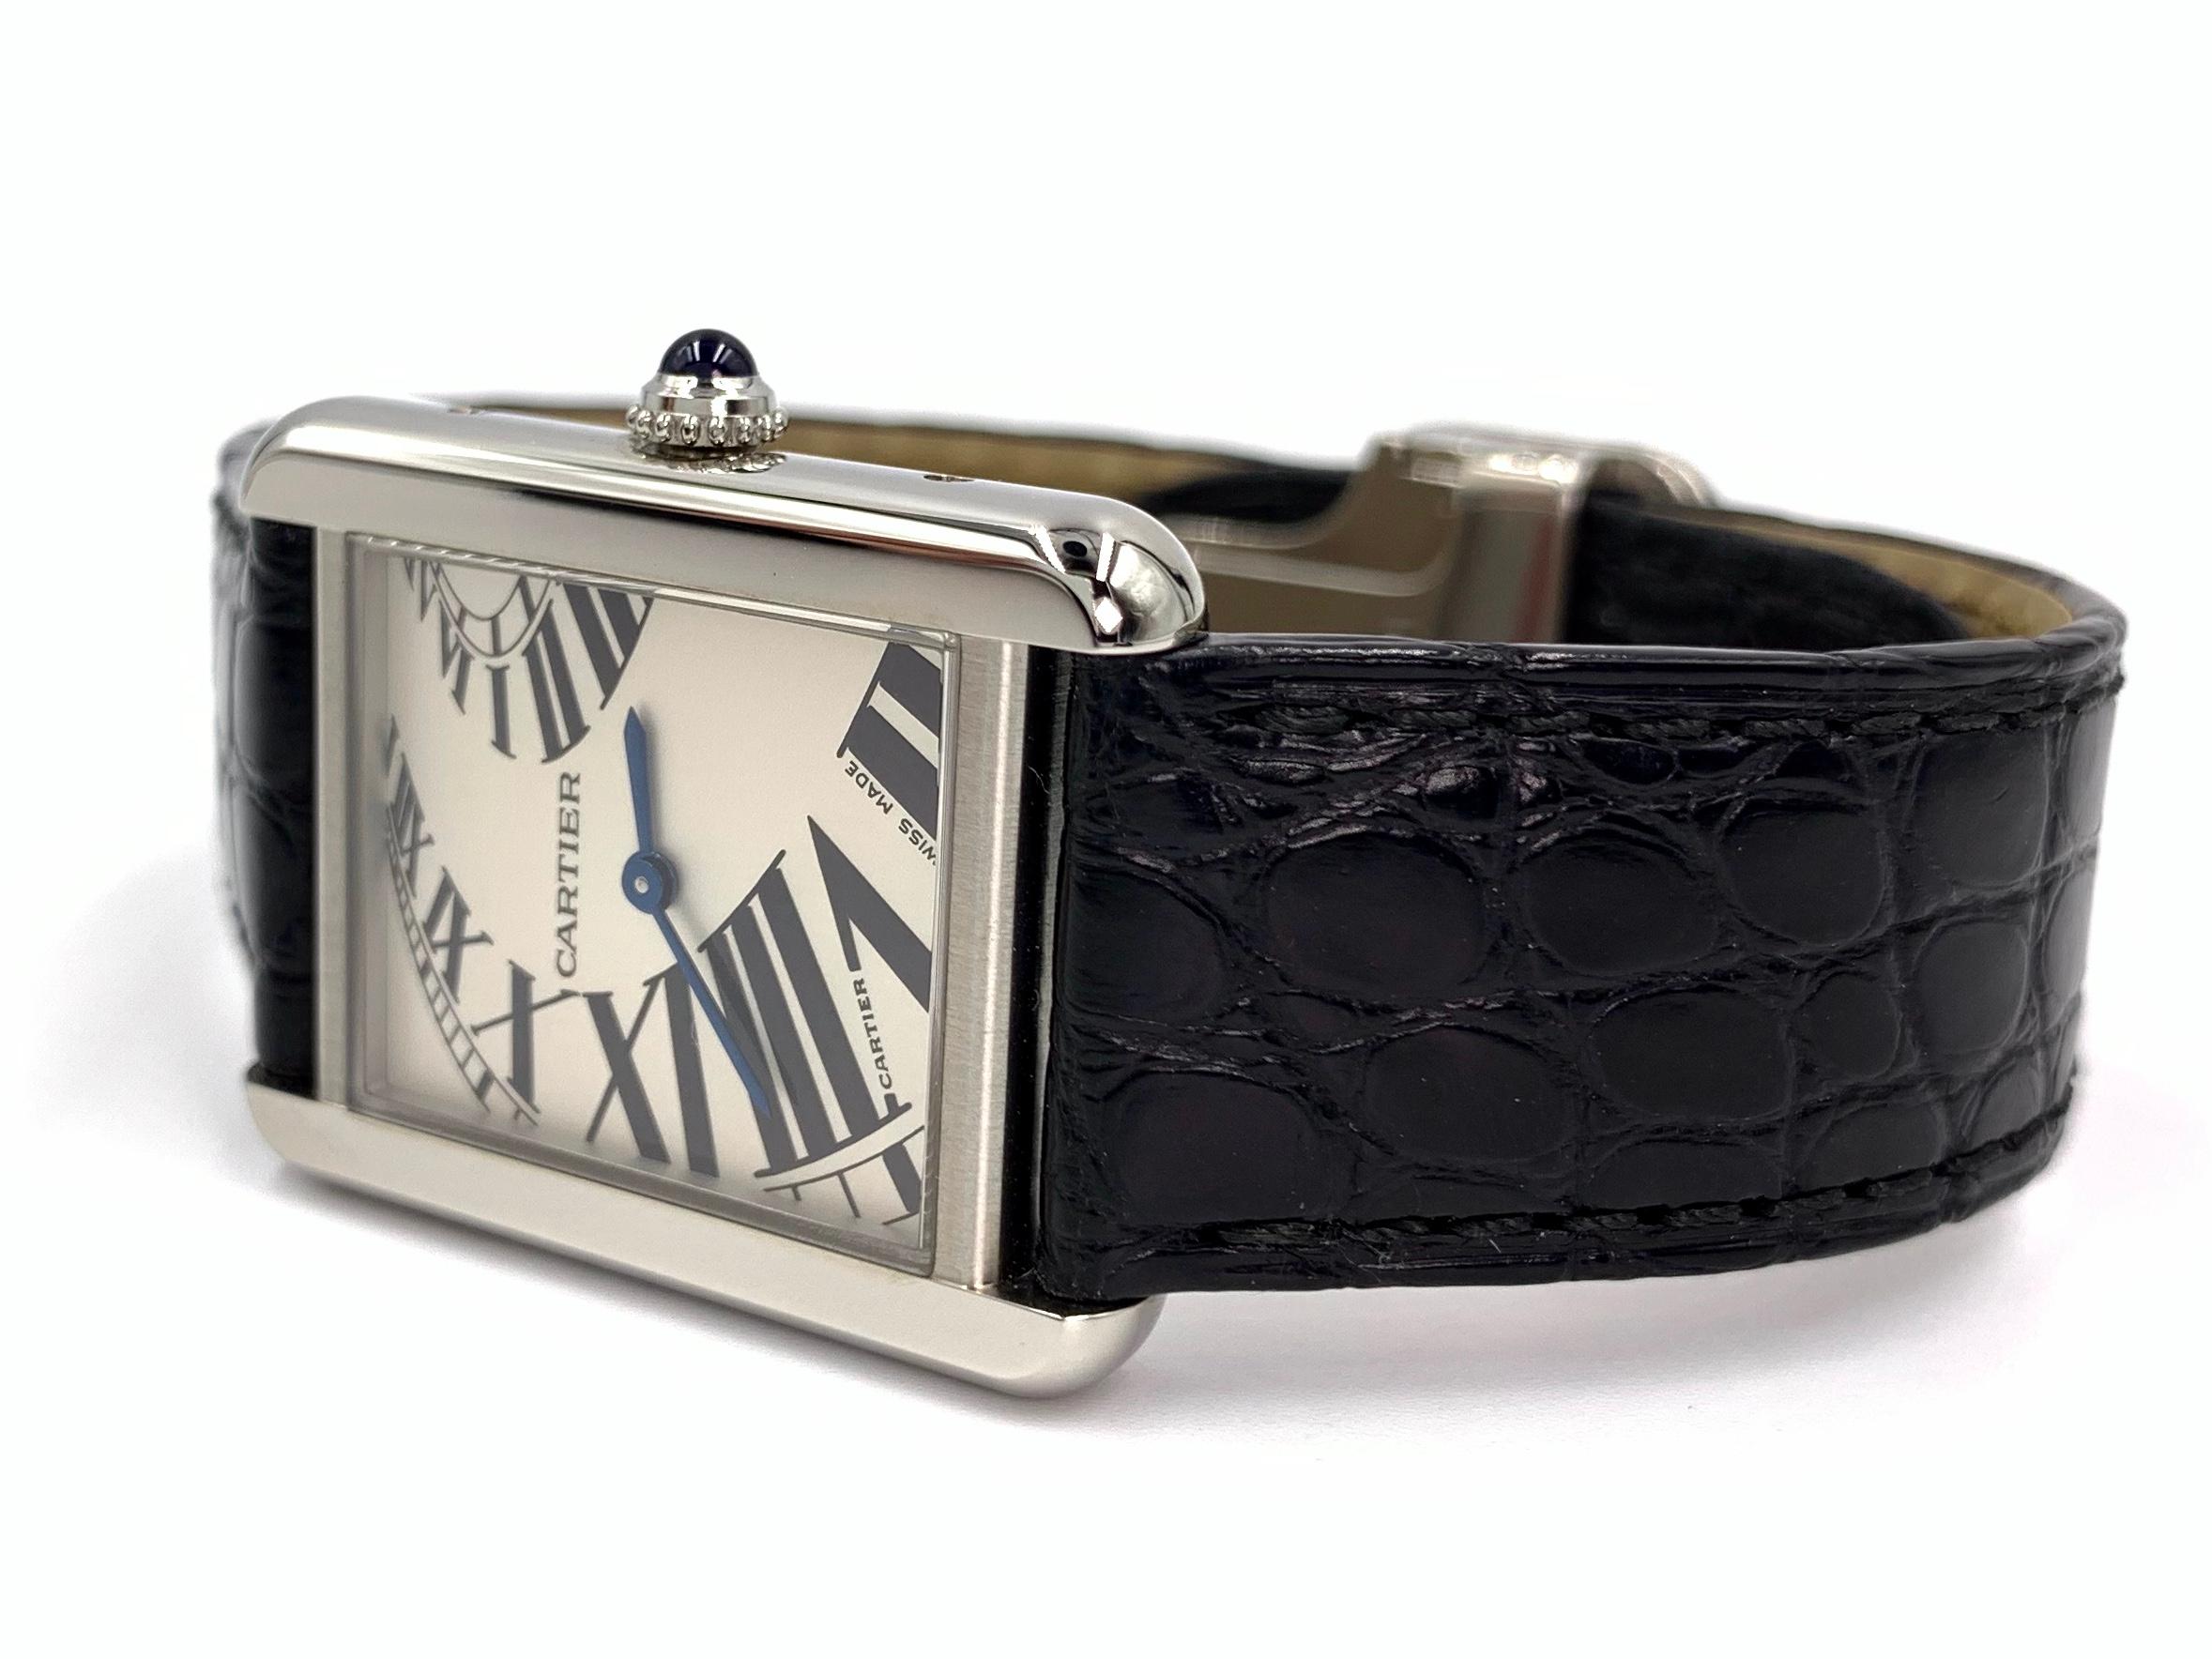 Playful Cartier Tank Solo small model watch with off-center, 